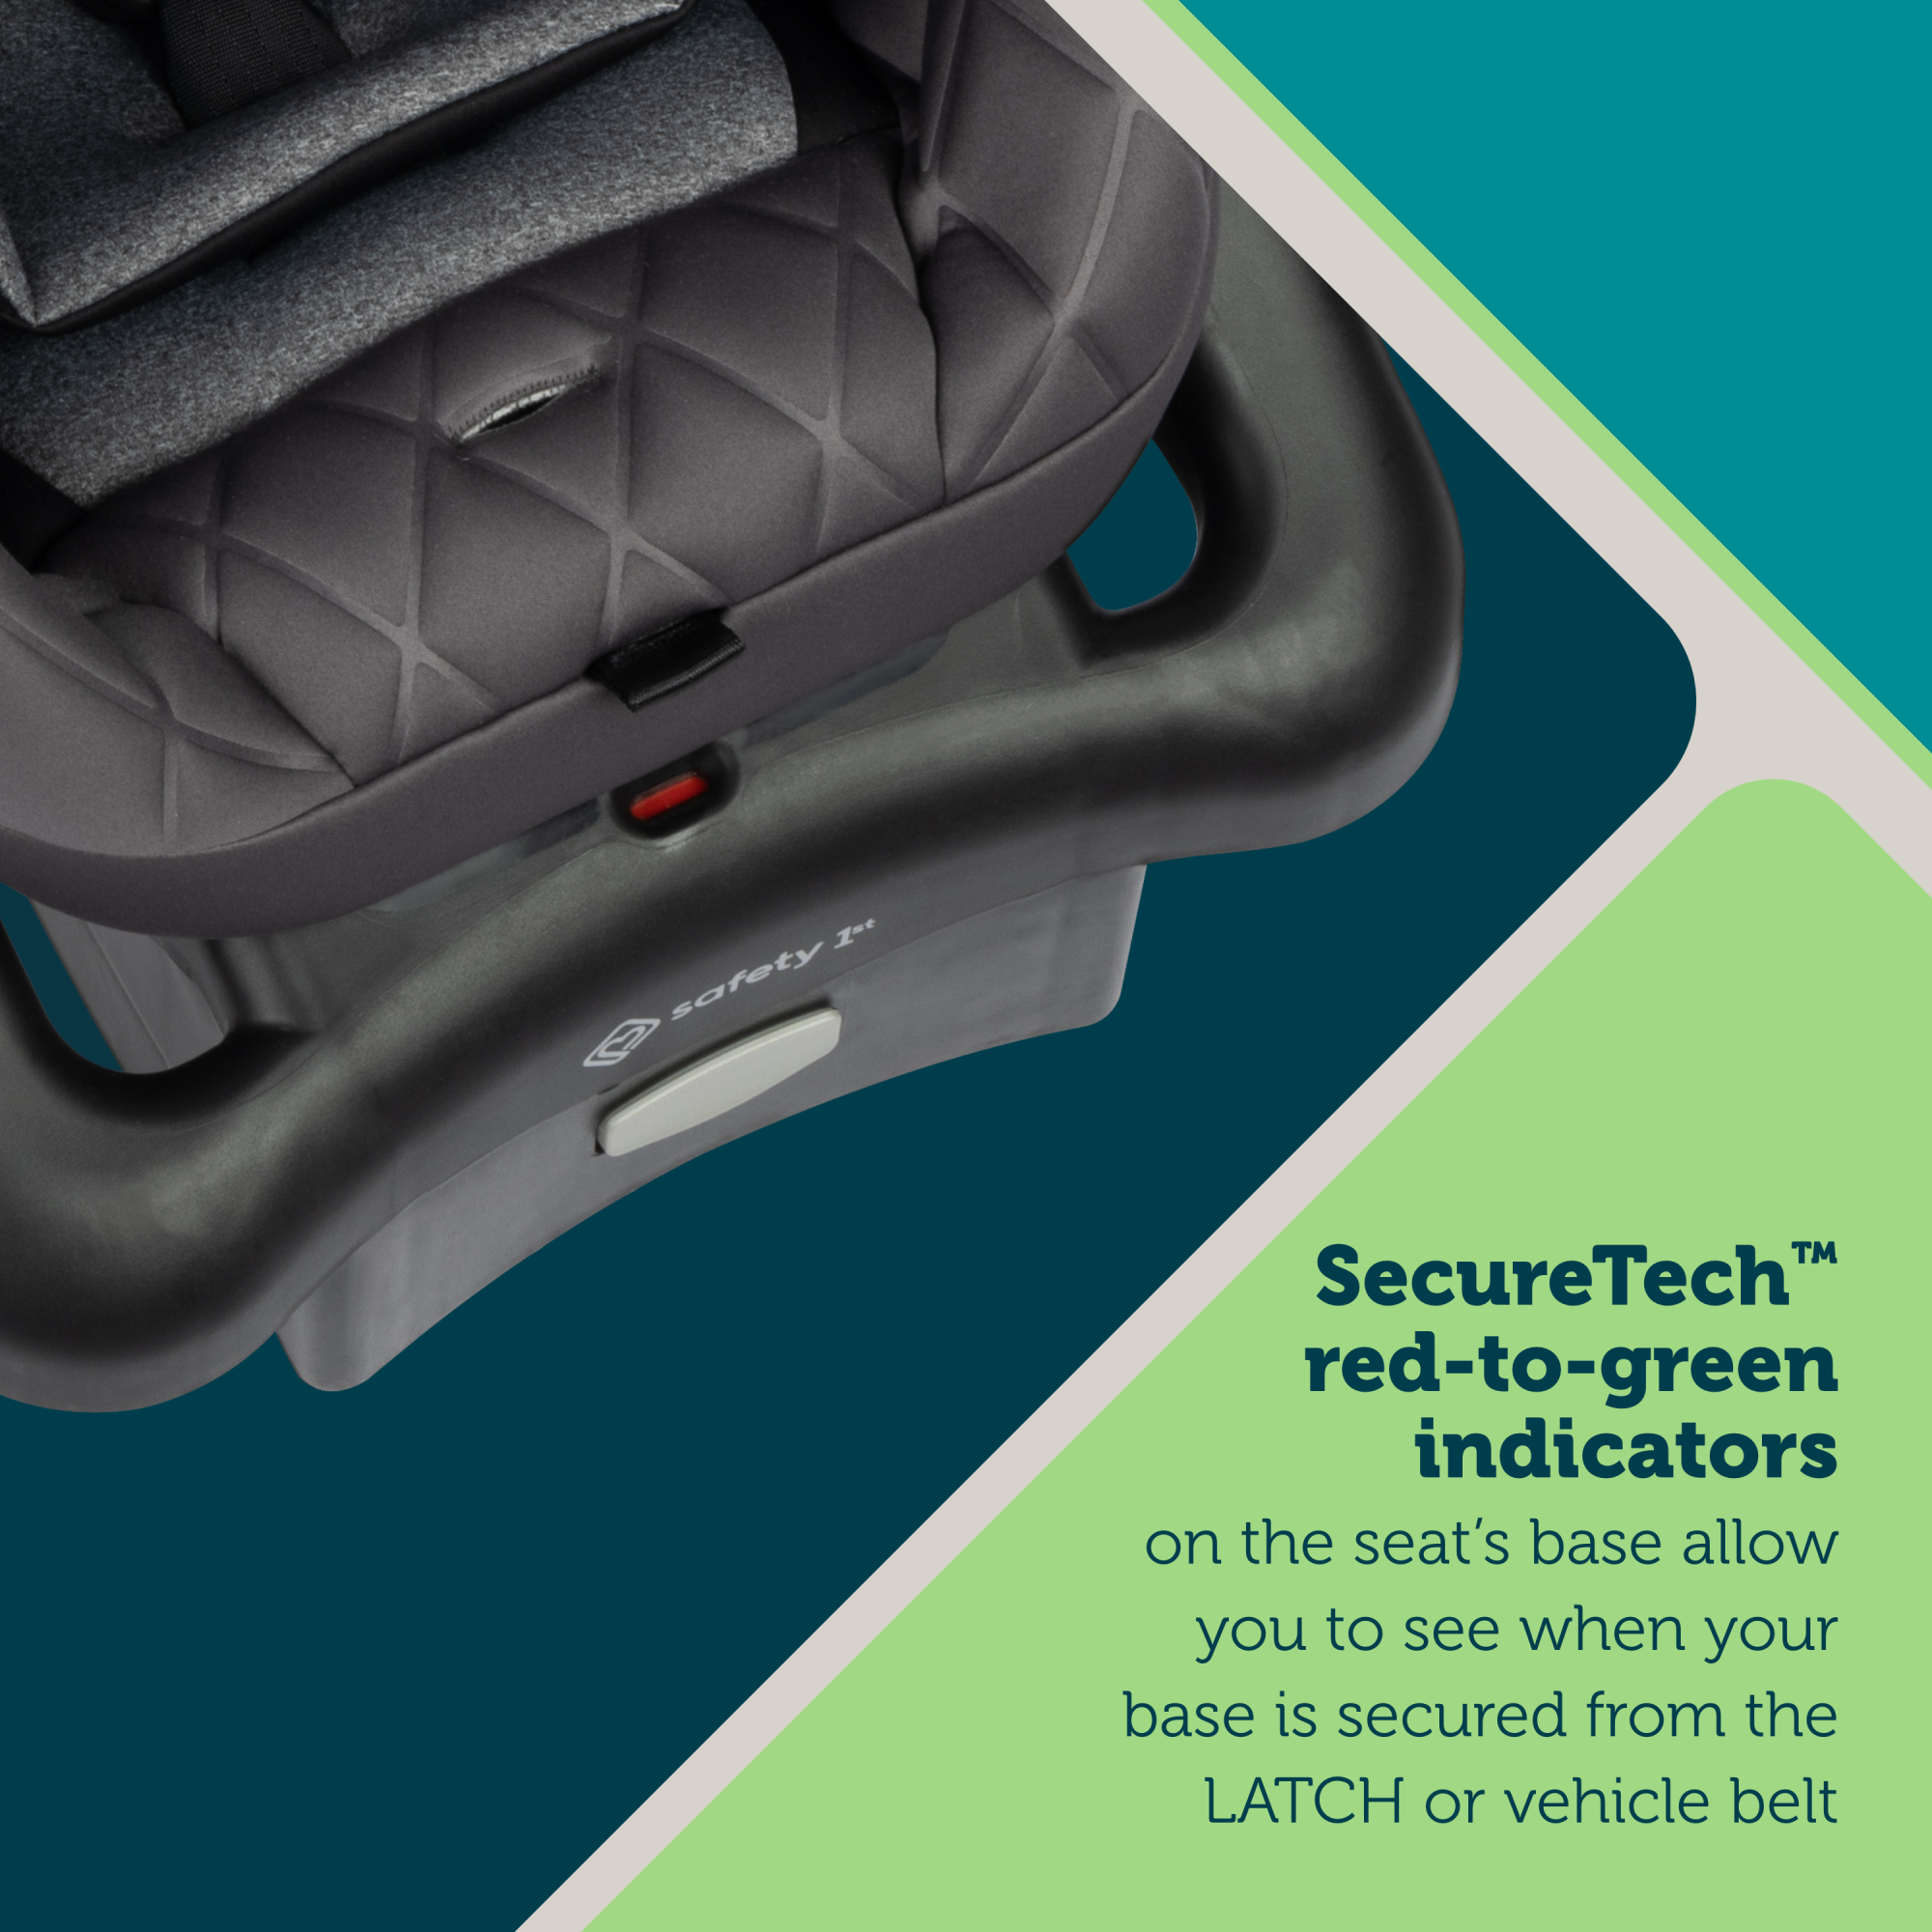 onBoard™ Insta-LATCH™ DLX Infant Car Seat - SecureTech red-to-green indicators on the seat's base allow you to see when your base is secured from the LATCH or vehicle belt